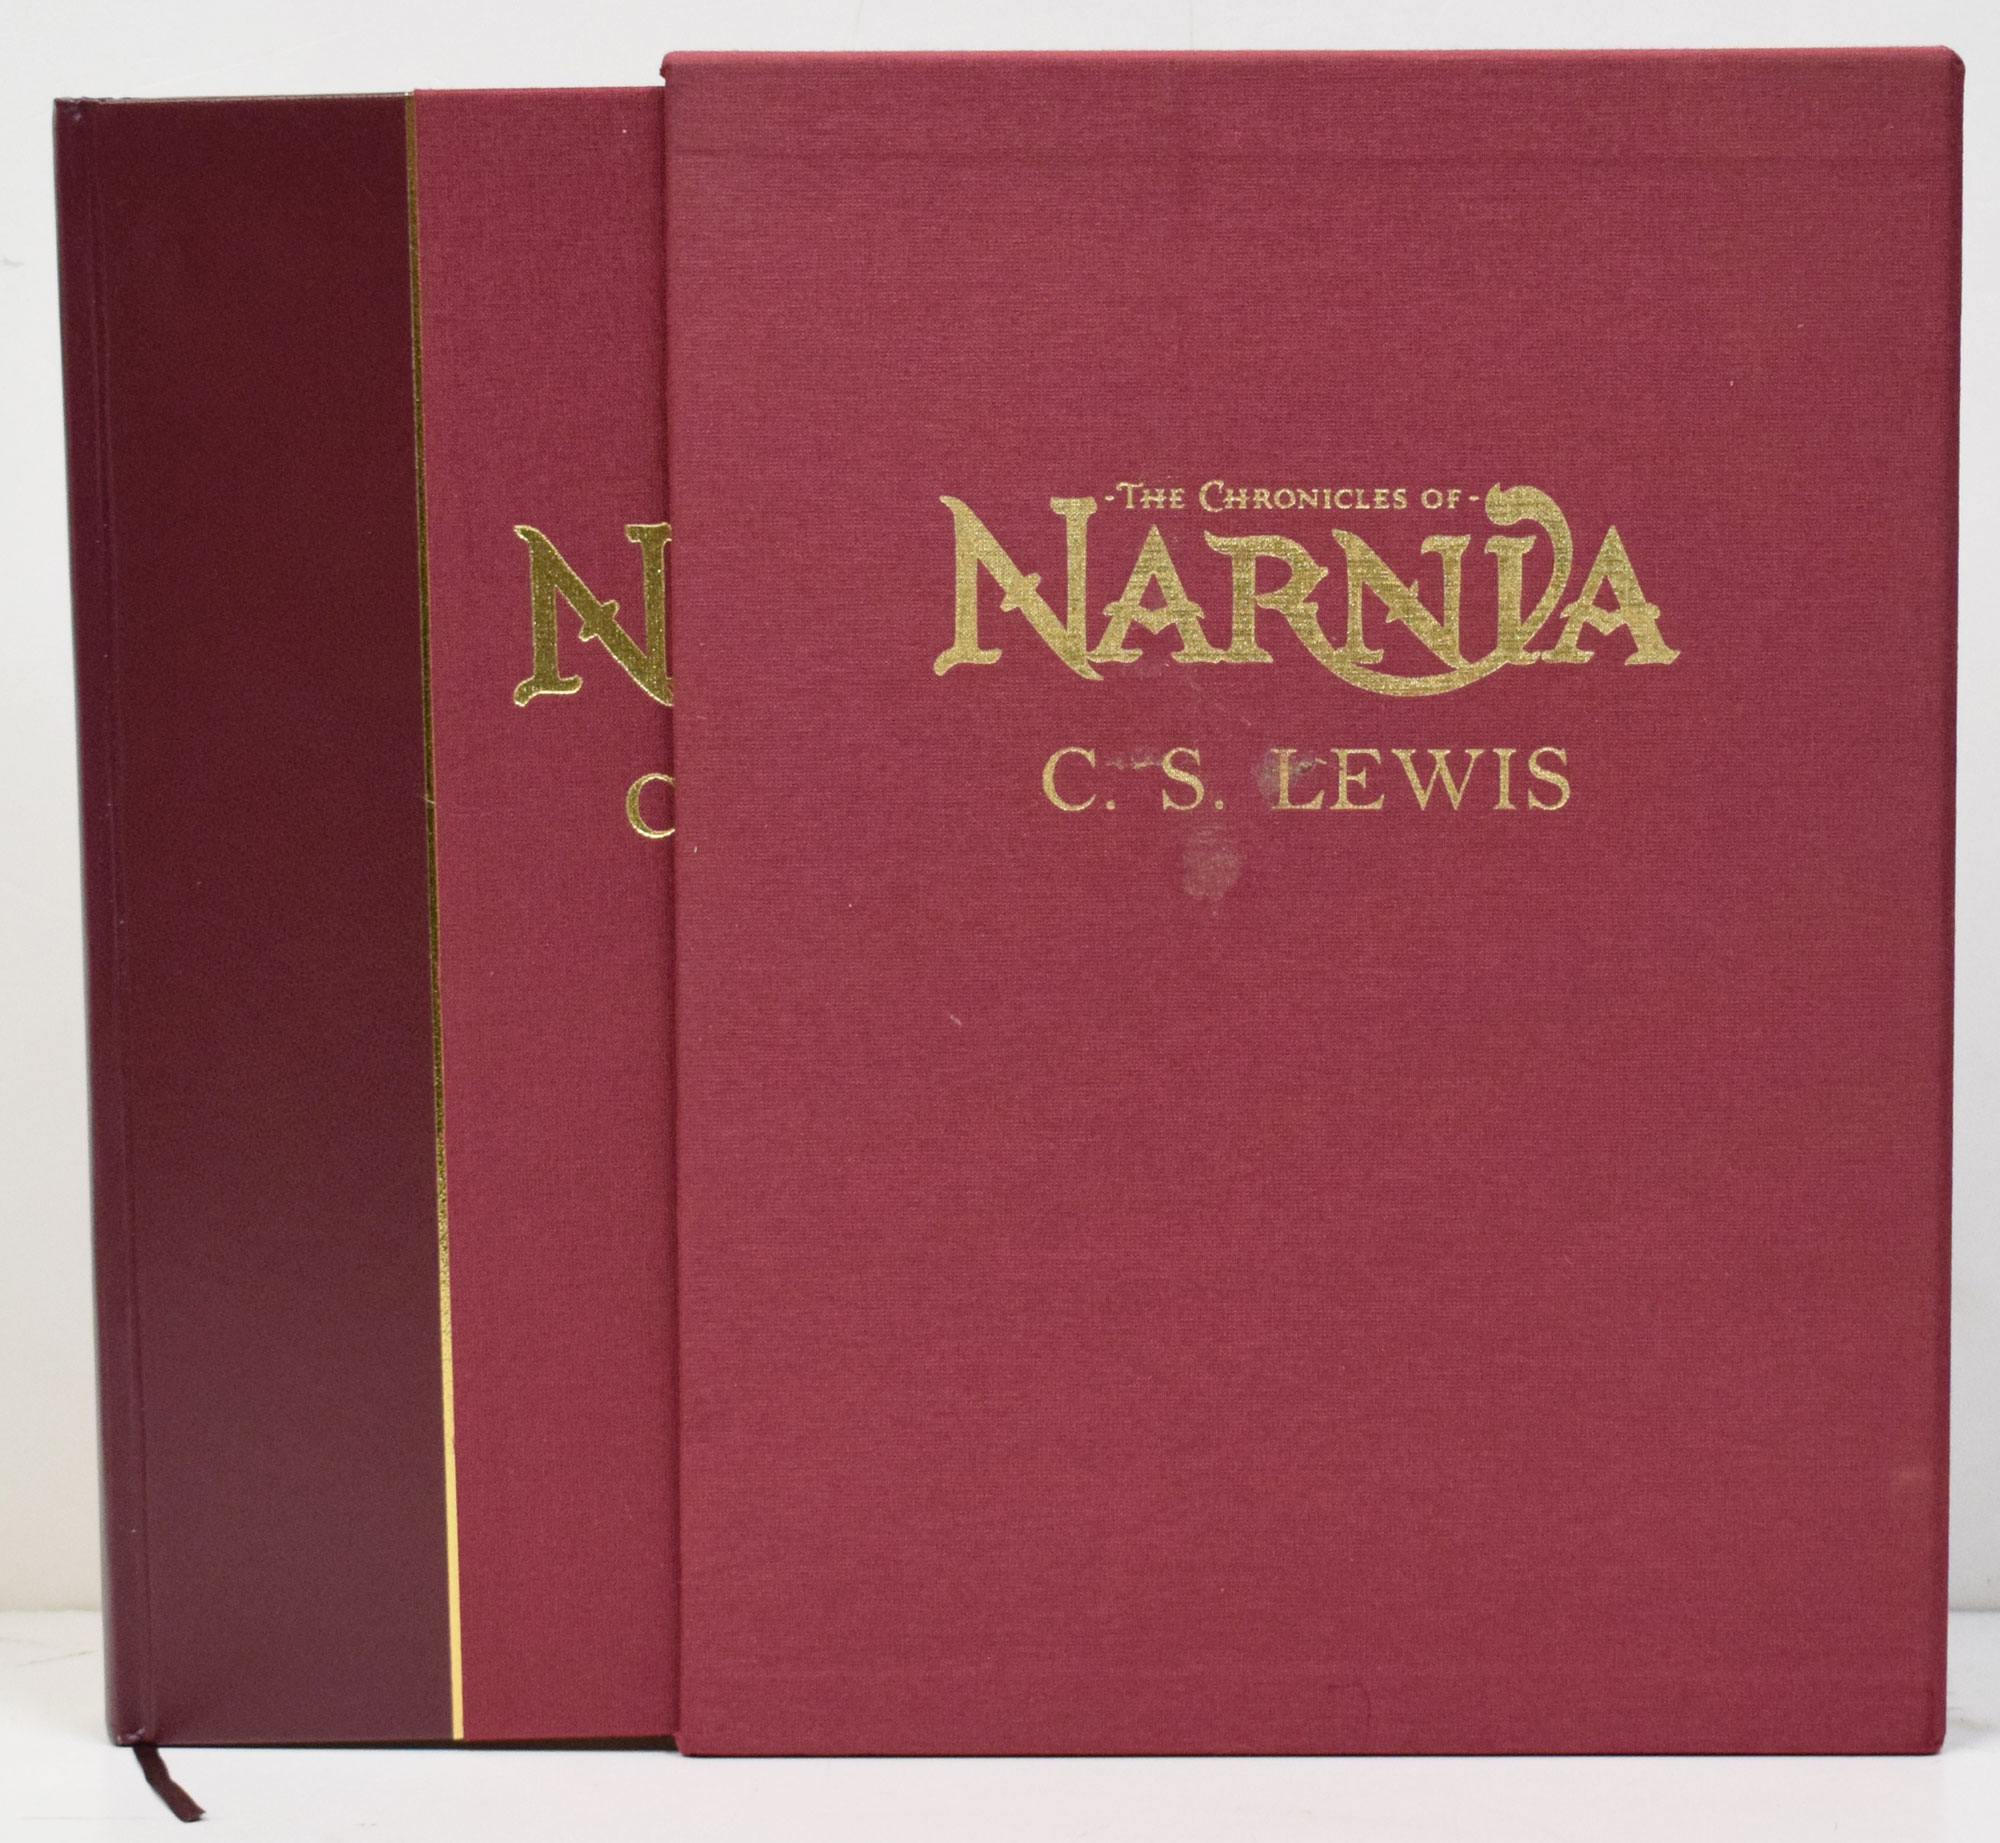 The Complete Chronicles of Narnia. De-luxe edition.